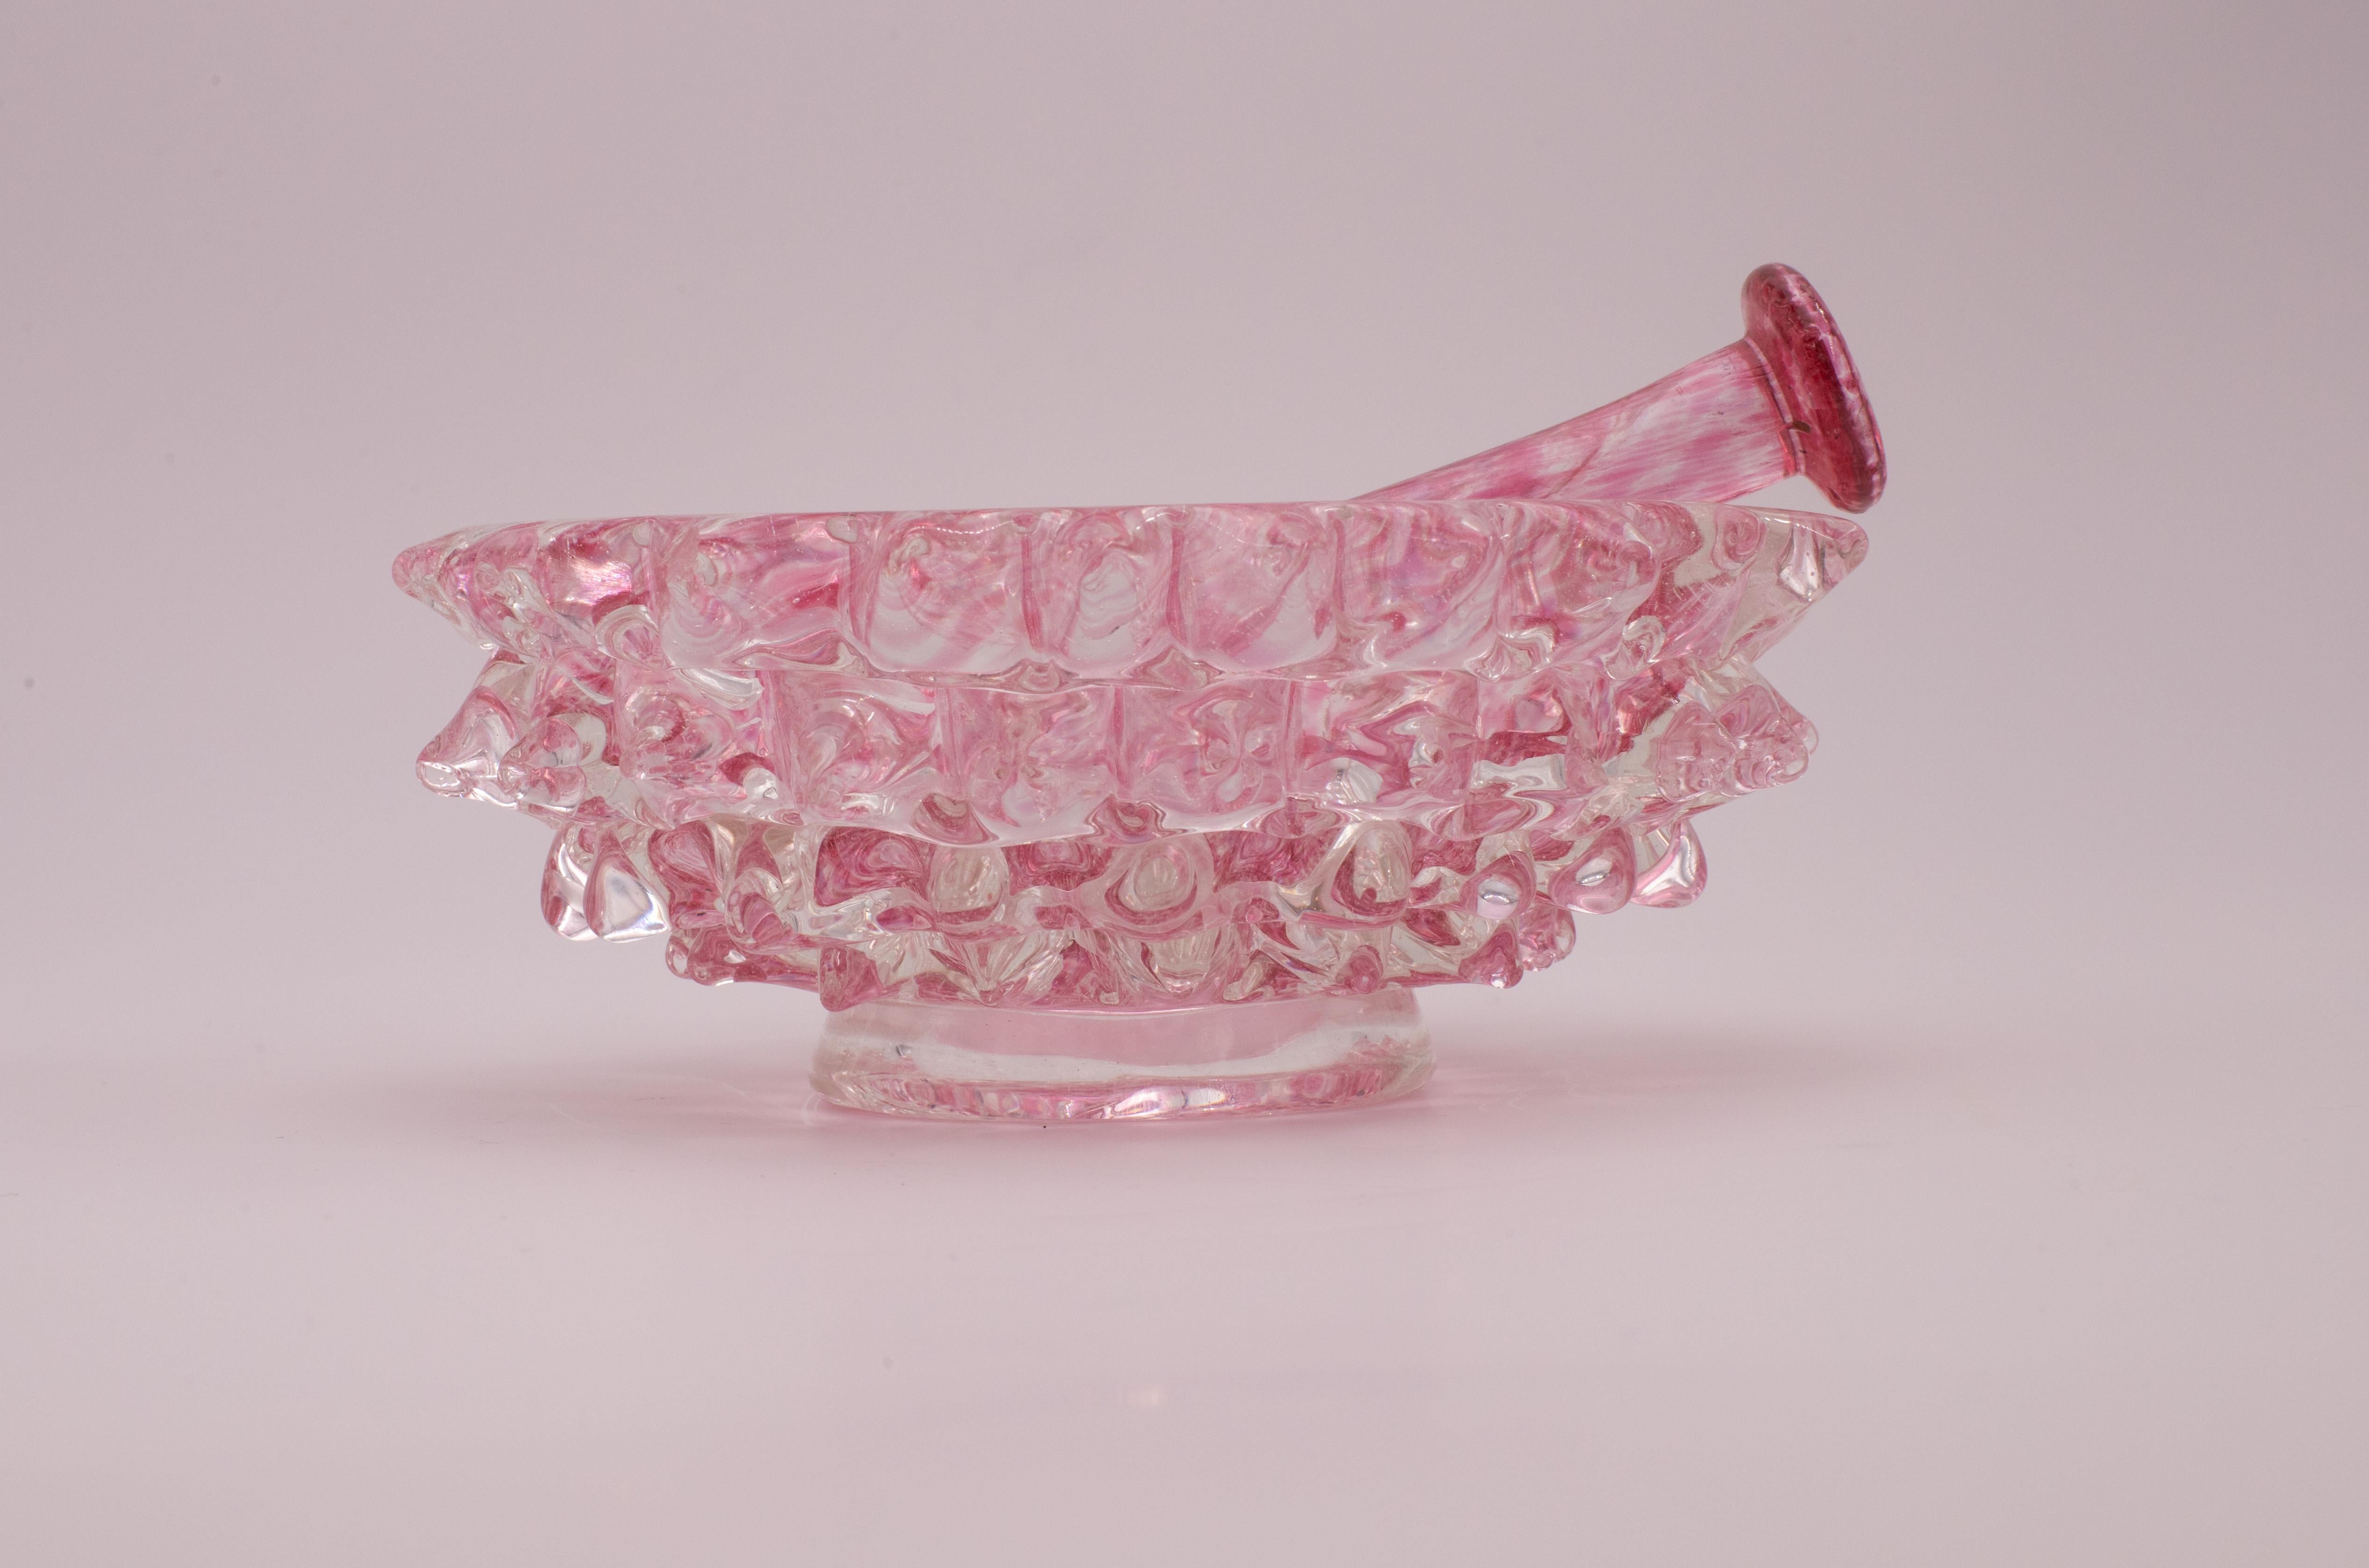 Incredible mouth-blown Murano glass vase in rare pink rostrato from the middle of the last century. This wonderful object was produced in the 1940s in Italy by Ercole Barovier for Barovier & Toso.
The mortar-rod is also sold together with the